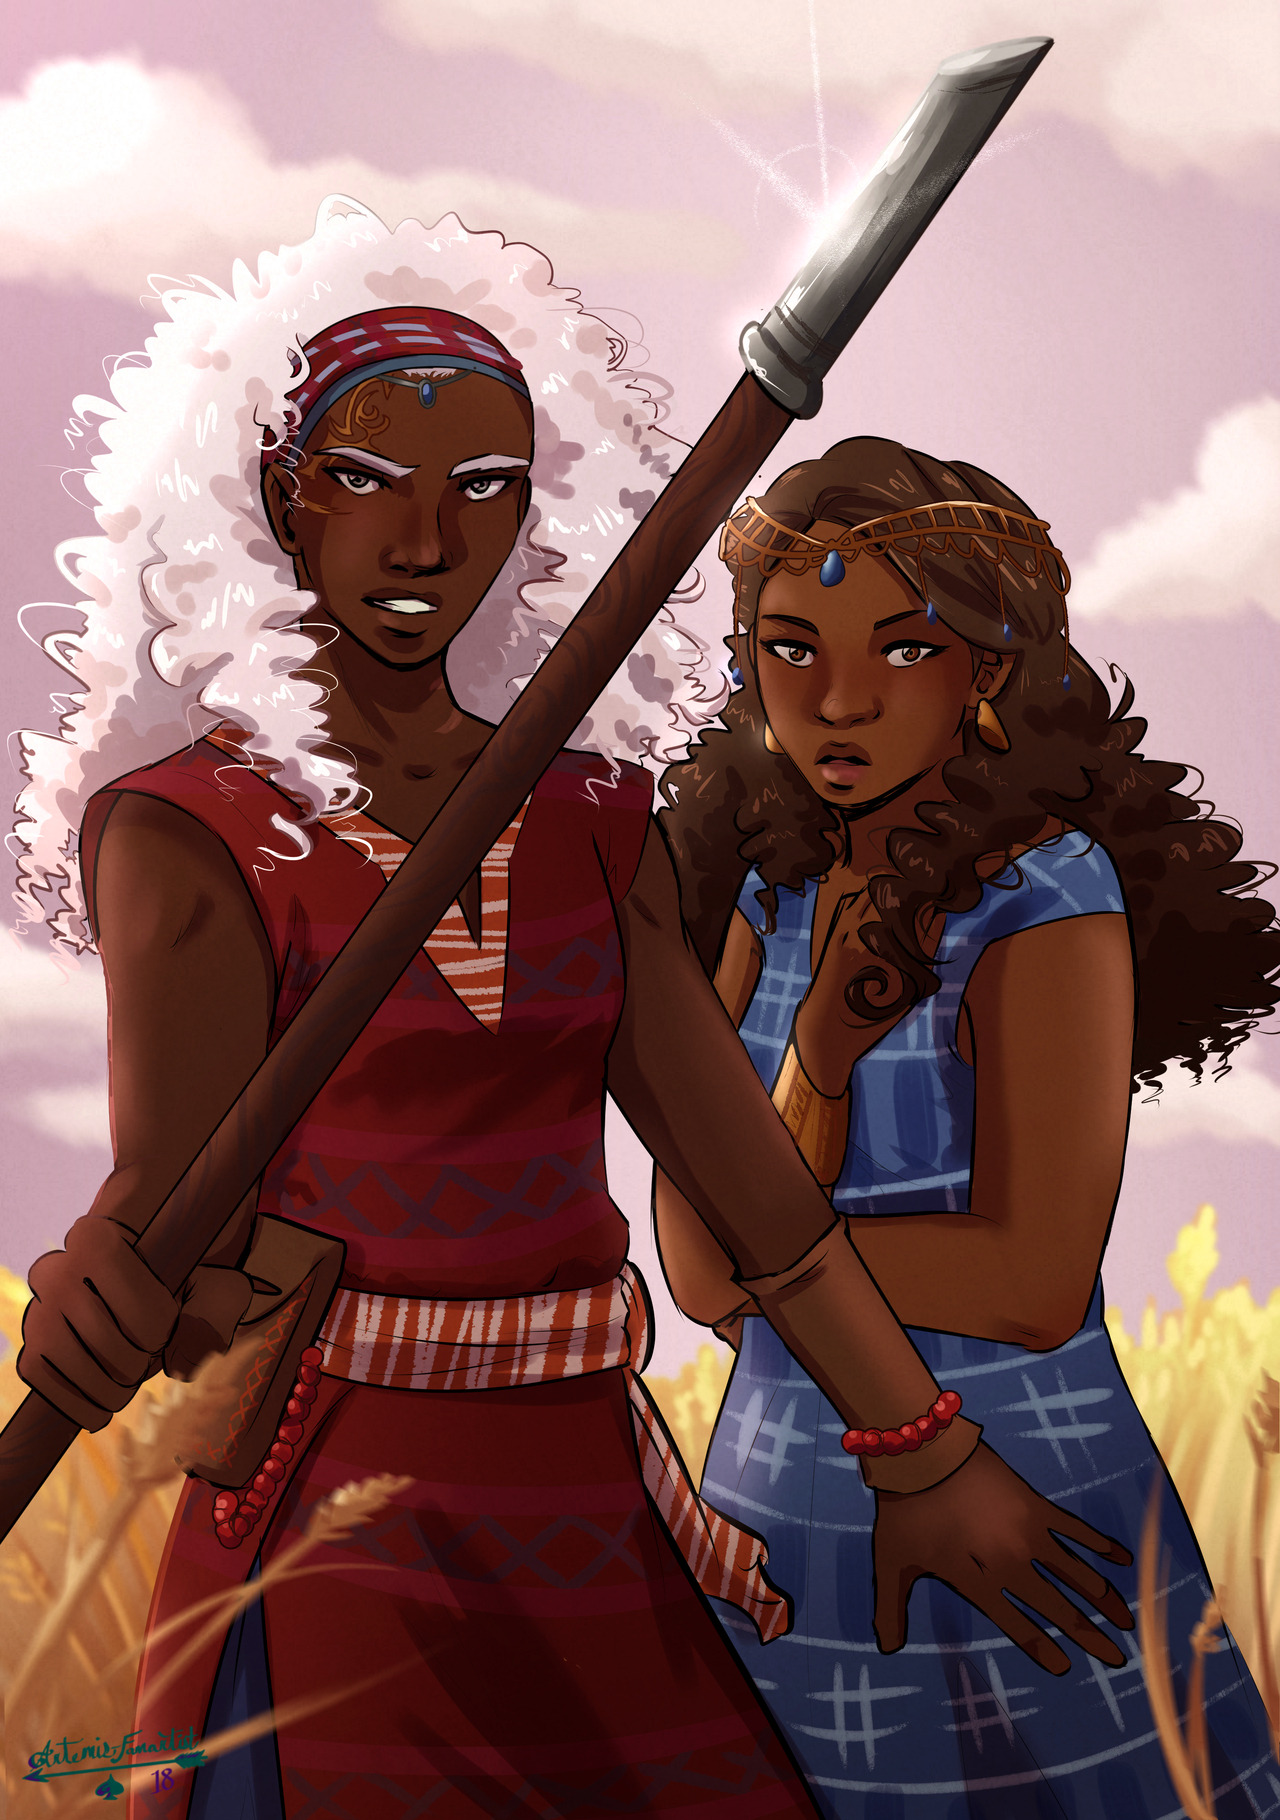 Book Fanartist — My only ship in Children of Blood and Bone.